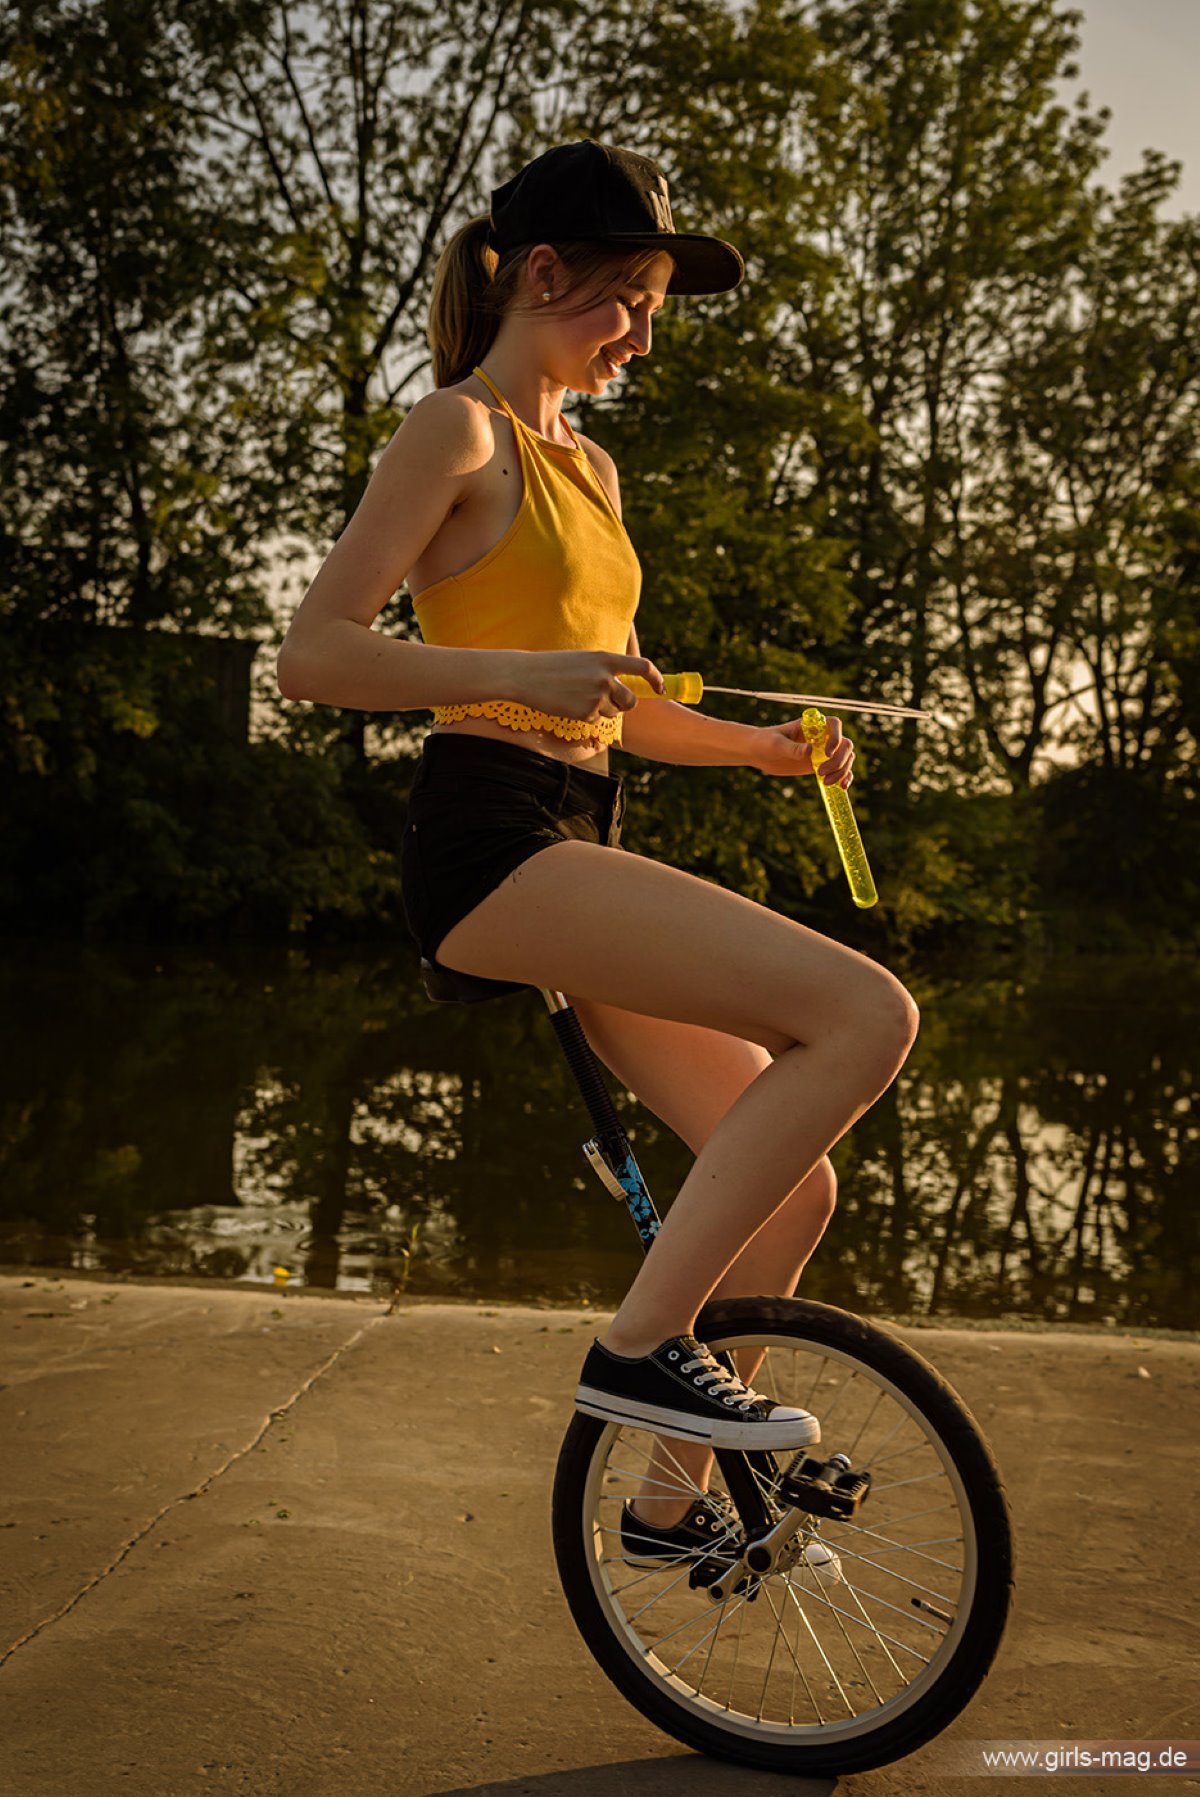 Girls Mag Annika Bubbles on a Unicycle 0107 4189589712.jpg